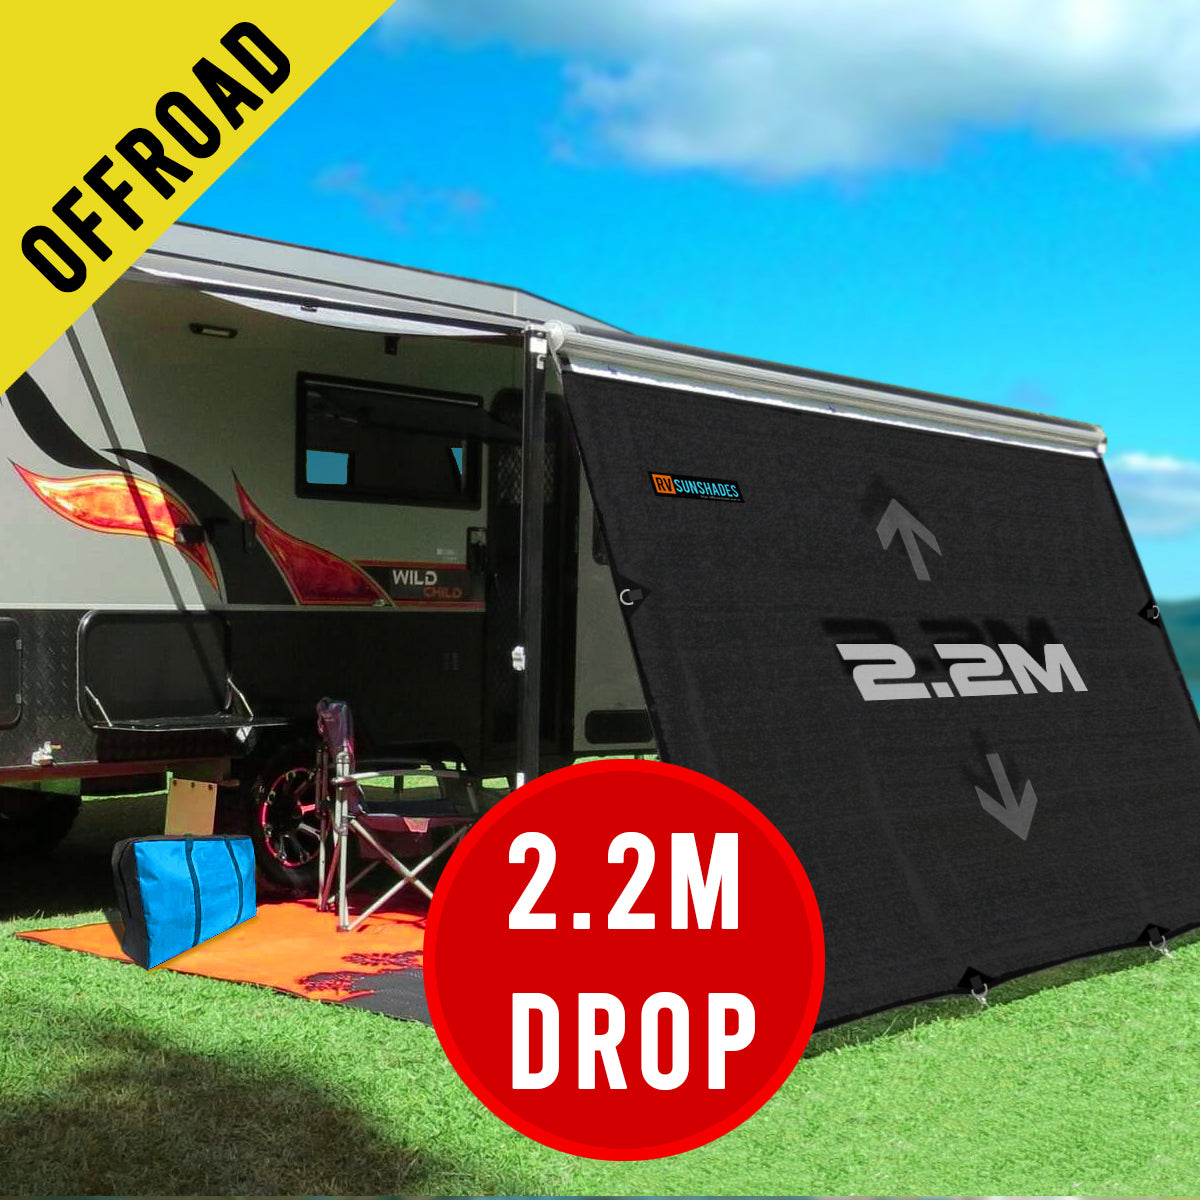 Offroad Caravan Privacy Screen 3.7x2.2m suit 13Ft Awning (2.2m Drop) iNSANE.SALE